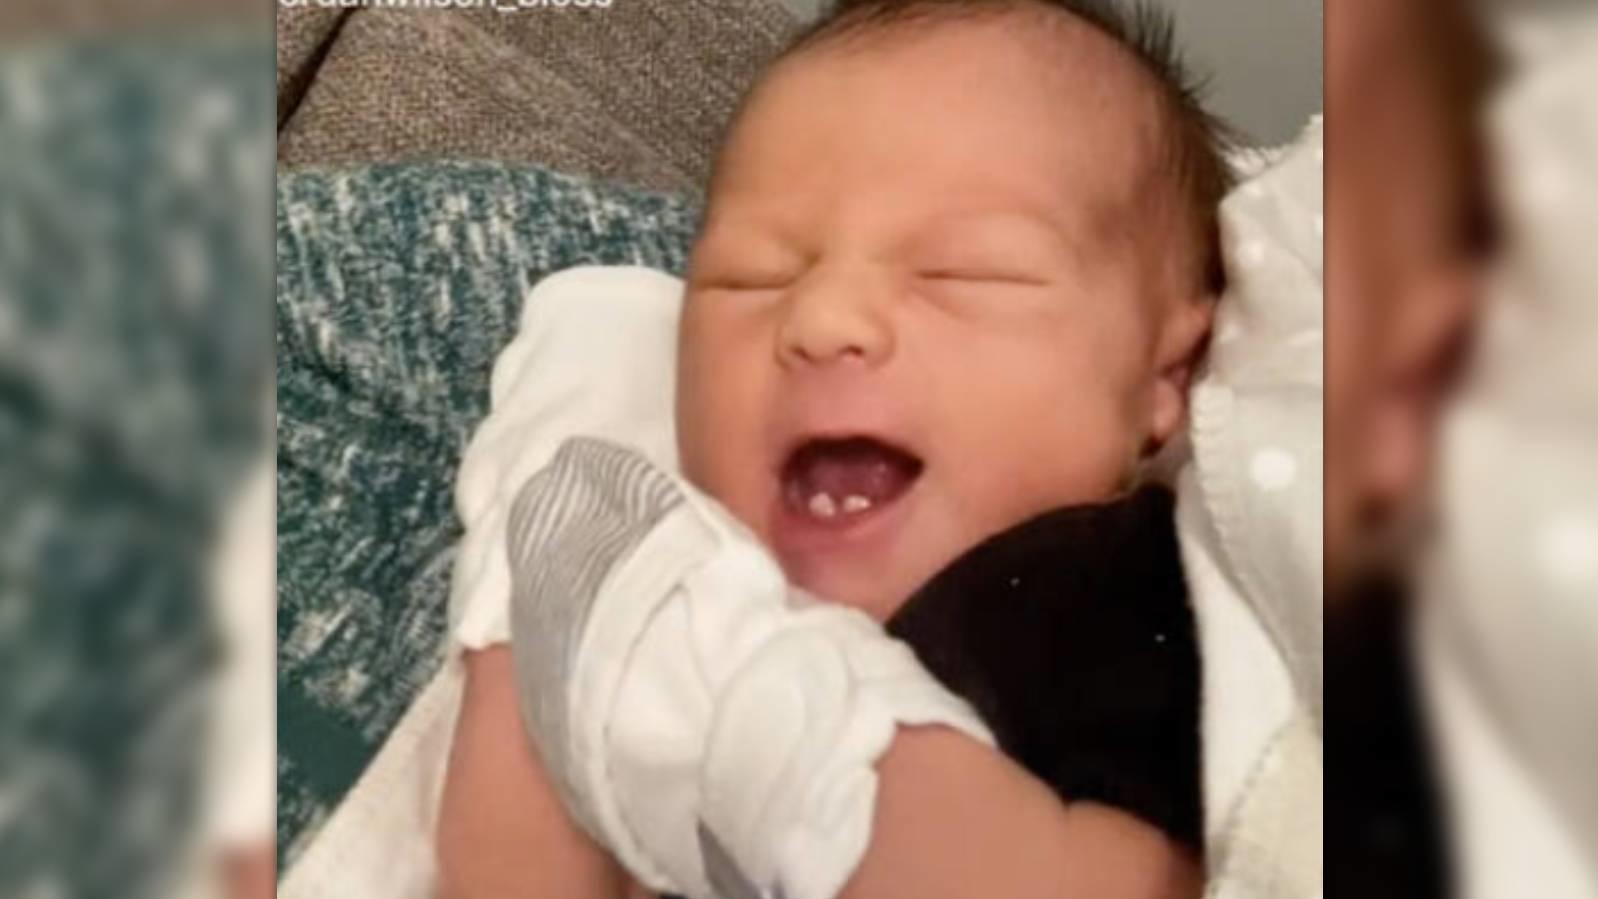 Kansas City: Baby is born with ‘witch teeth’